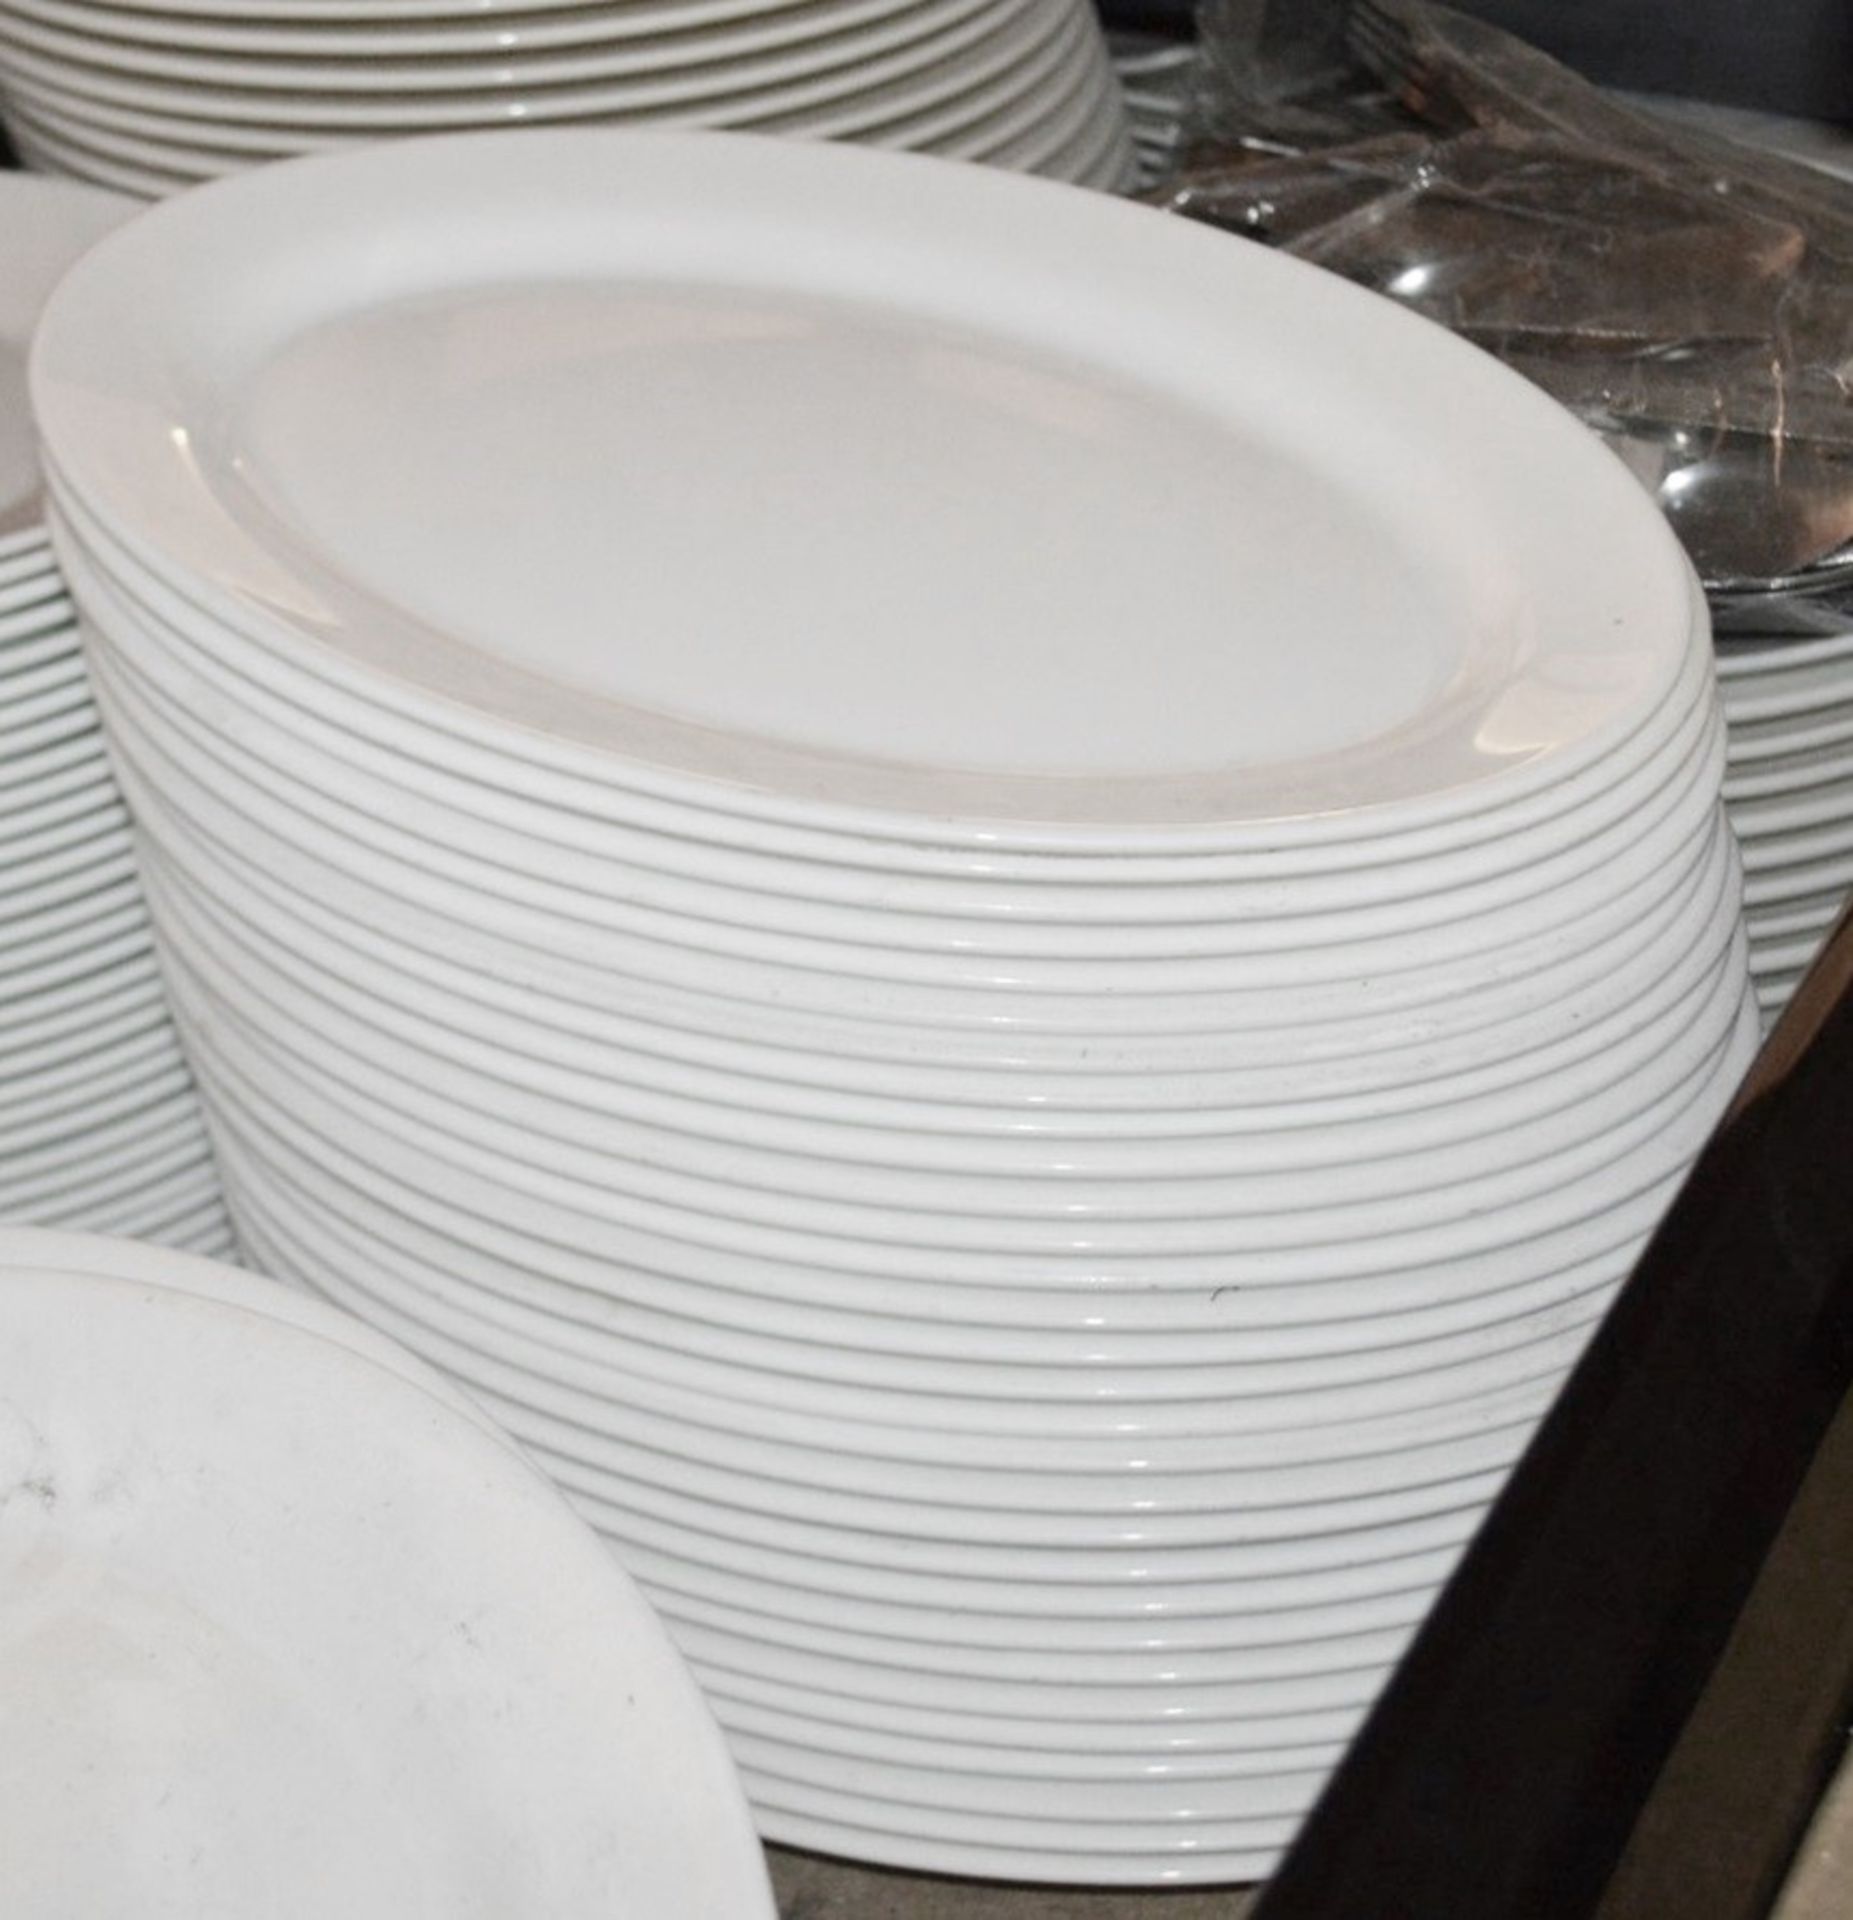 50 x Commercial Oval Dining Platter Plates - Dimensions: 31 x 23cm - Pre-owned, From A London - Image 2 of 4